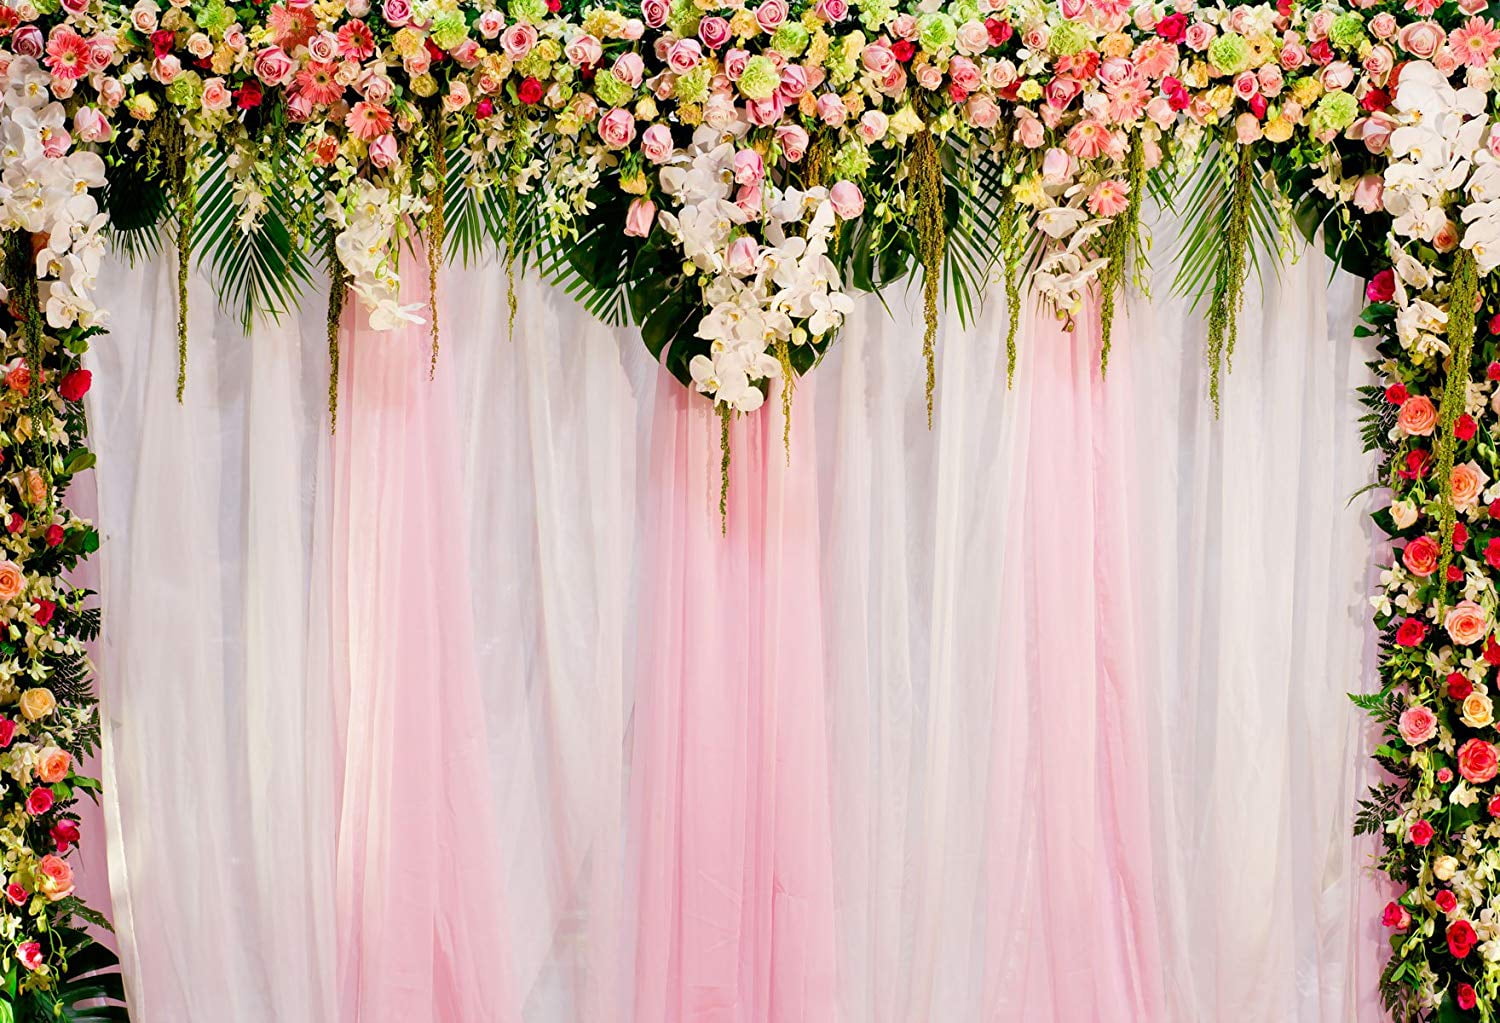 Laeacco Graceful Floral Wedding Stage 7x5ft Vinyl Photography Background Flowers Colorful Bulb String Decorations Backdrop Wedding Ceremony Photo Booth Bride Groom Shoot Studio Props